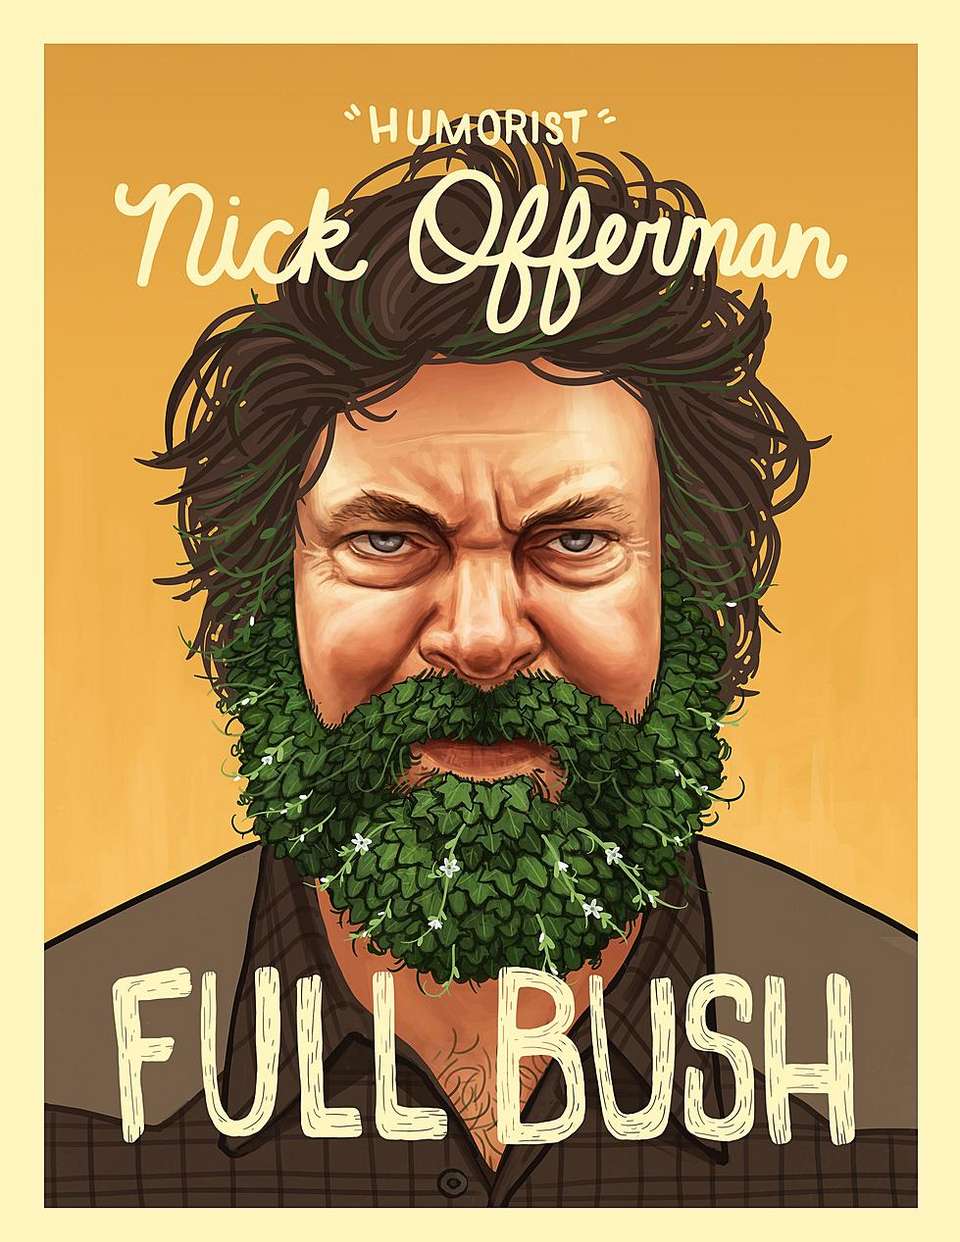 Tour Poster illustration of Nick Offerman in a brown collared shirt with a beard made of leaves.